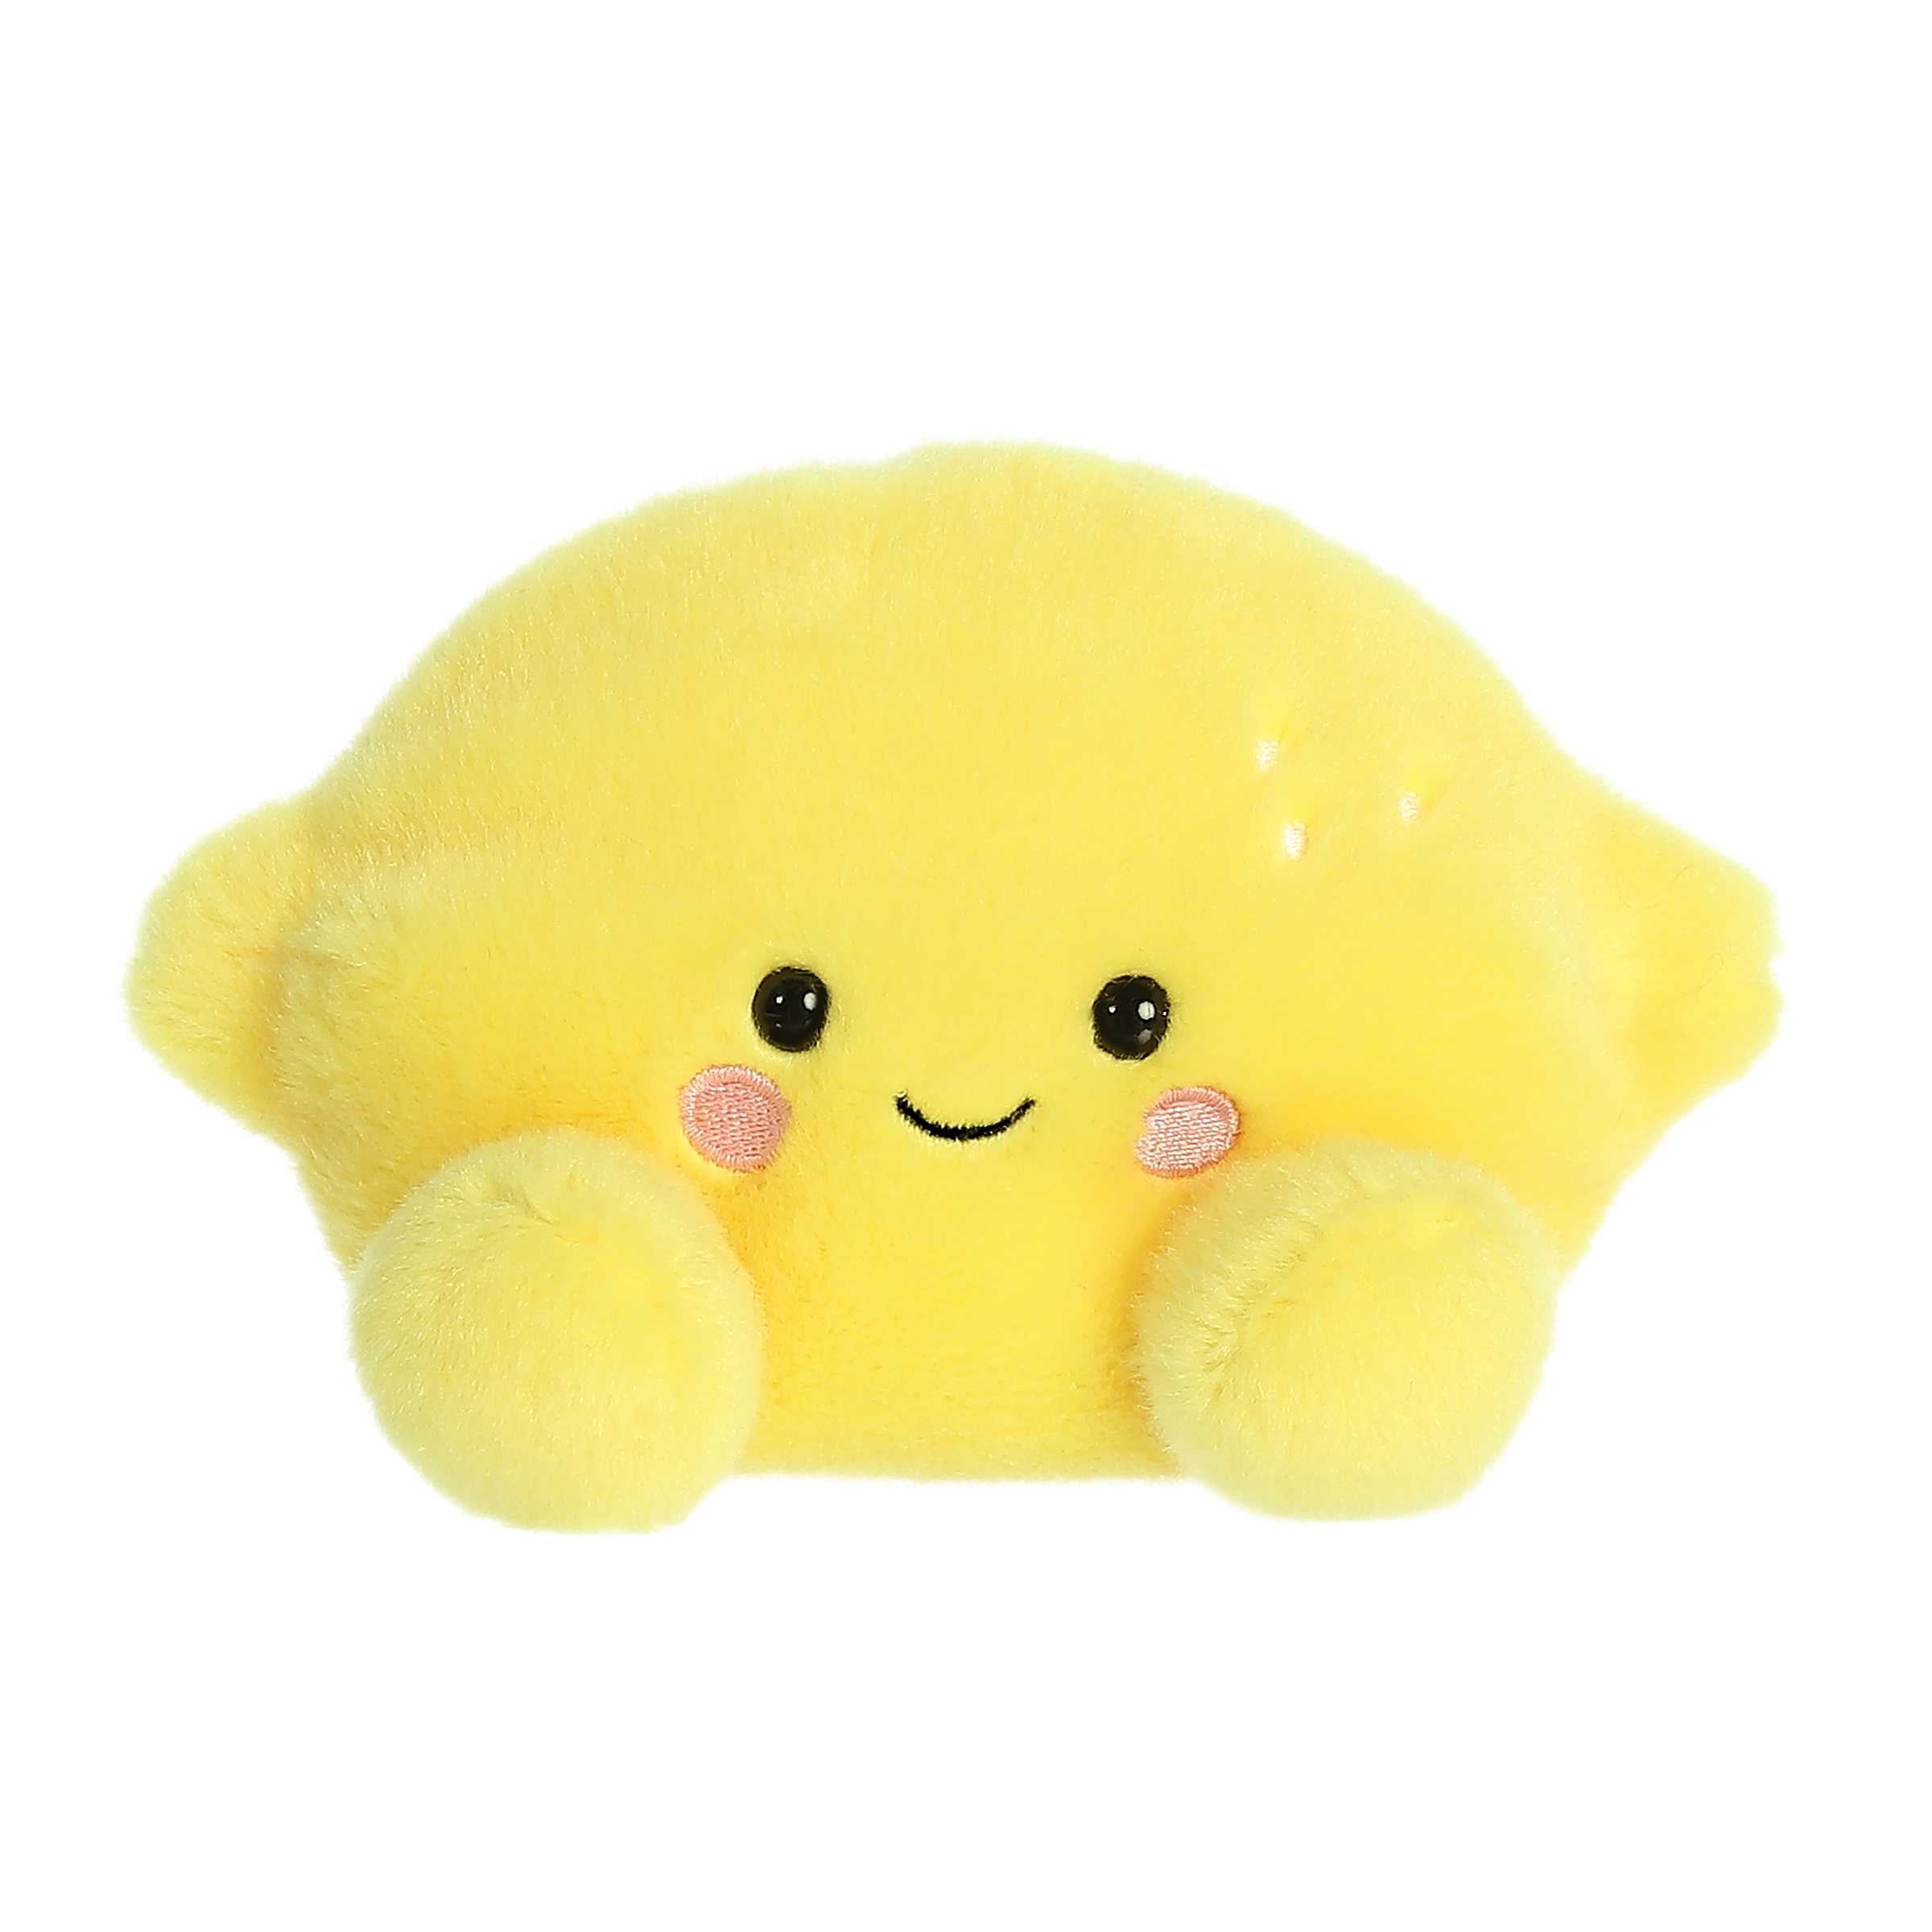 Cute mini lemon shaped plush toy with soft and bright yellow fur, white accents on the front, and a smiling face embroidery.